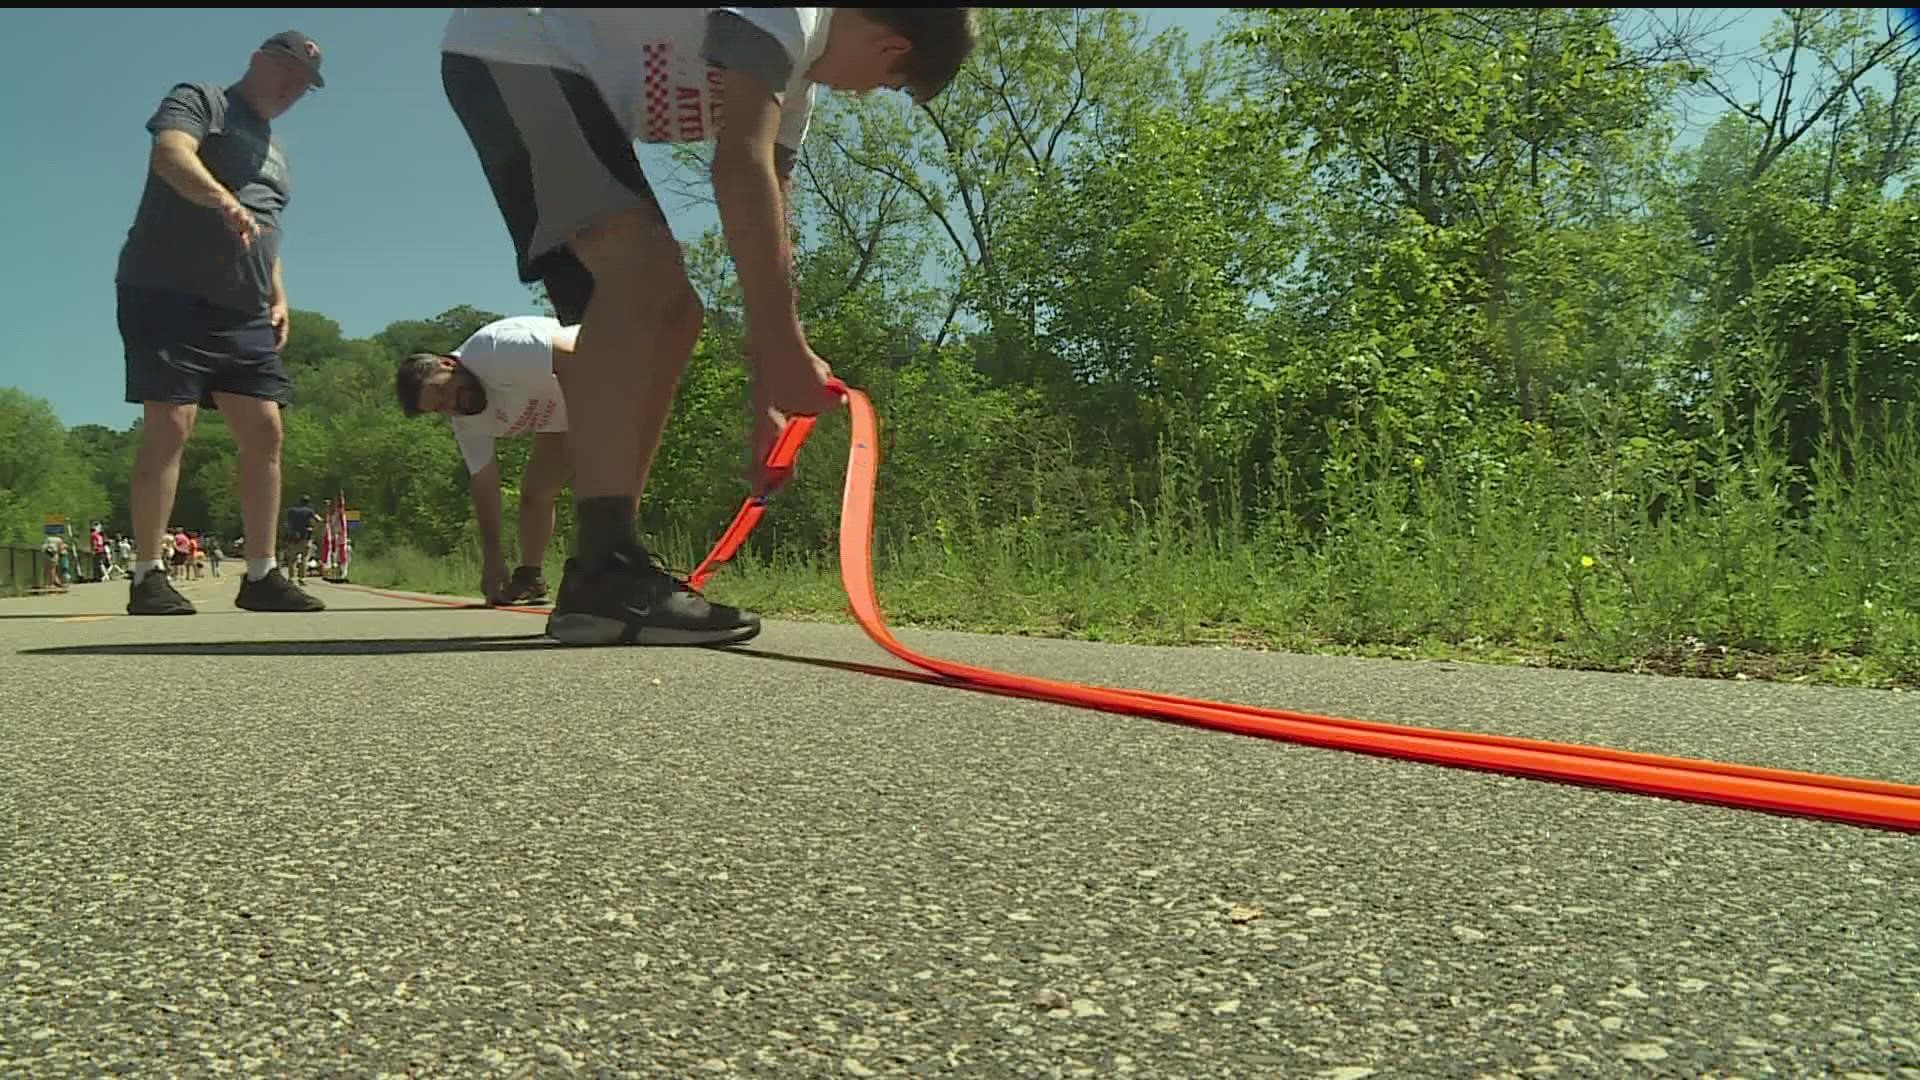 Boy Scouts are trying to build the longest Hot Wheels track from Houlton, Wisconsin to the historic Stillwater Lift Bridge.